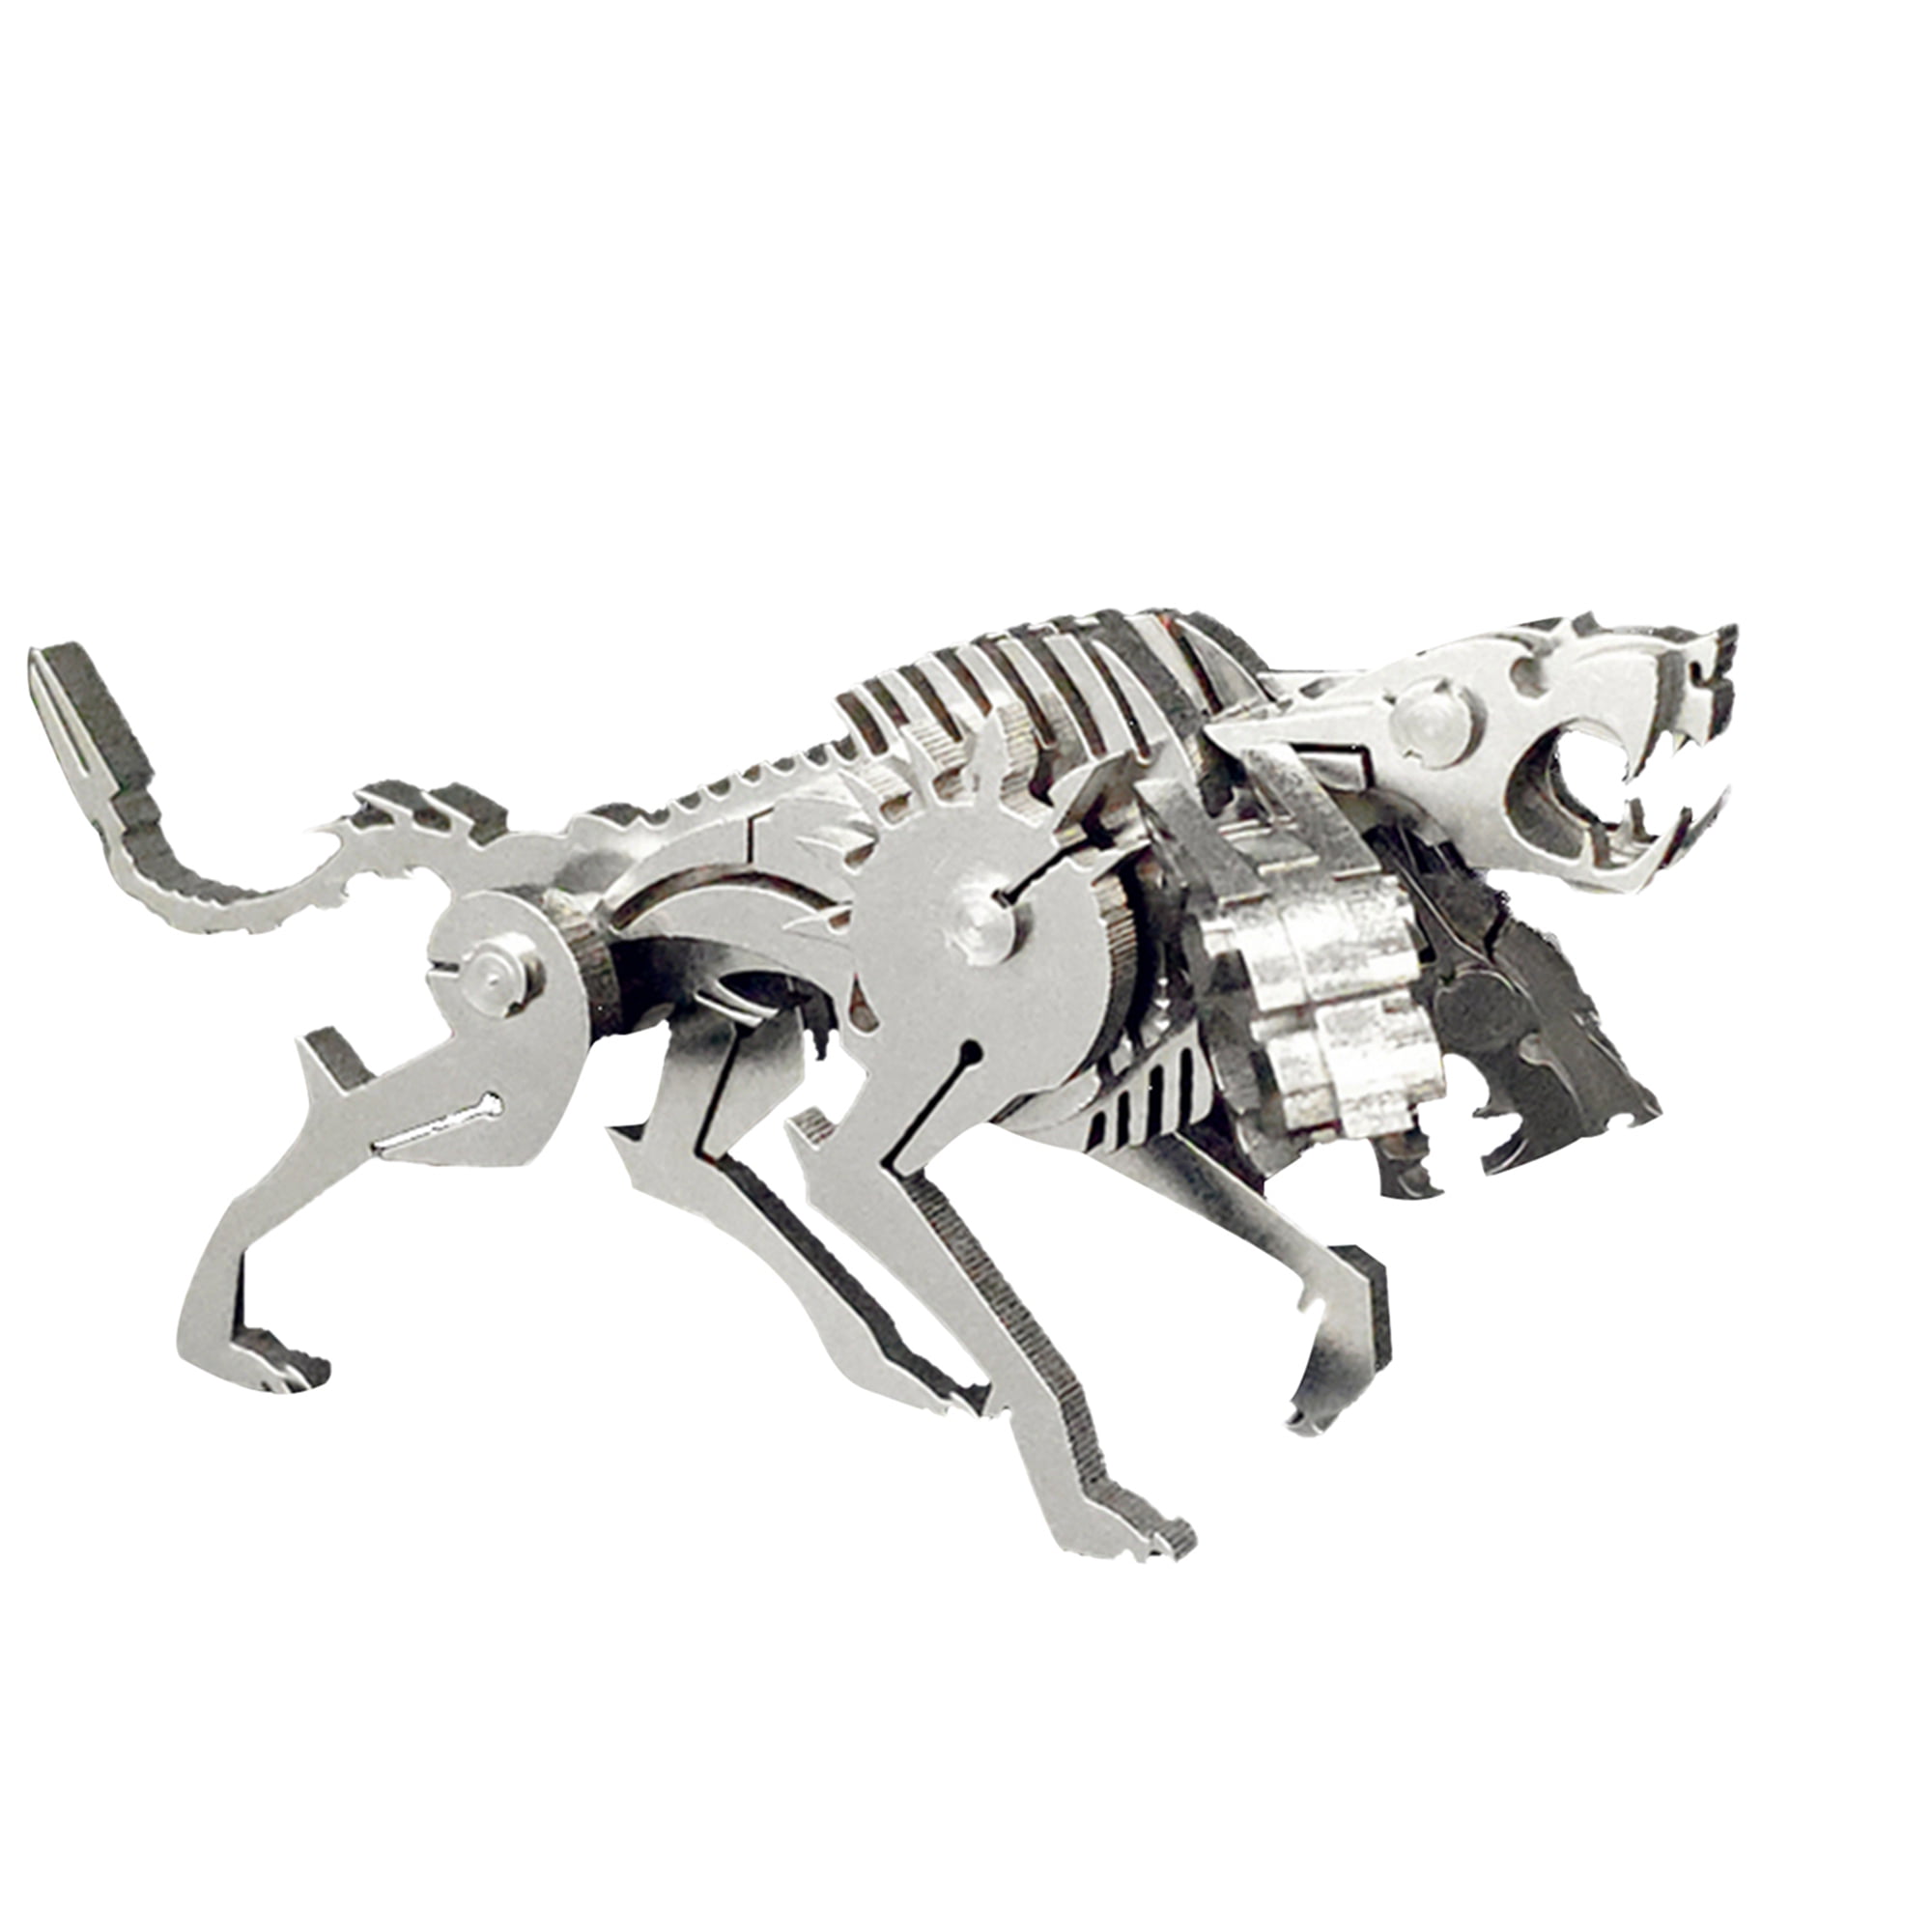 3D Griffin Stainless Steel Skeleton Puzzle Joint Mobility Miniature Model Kits Puzzle Toys